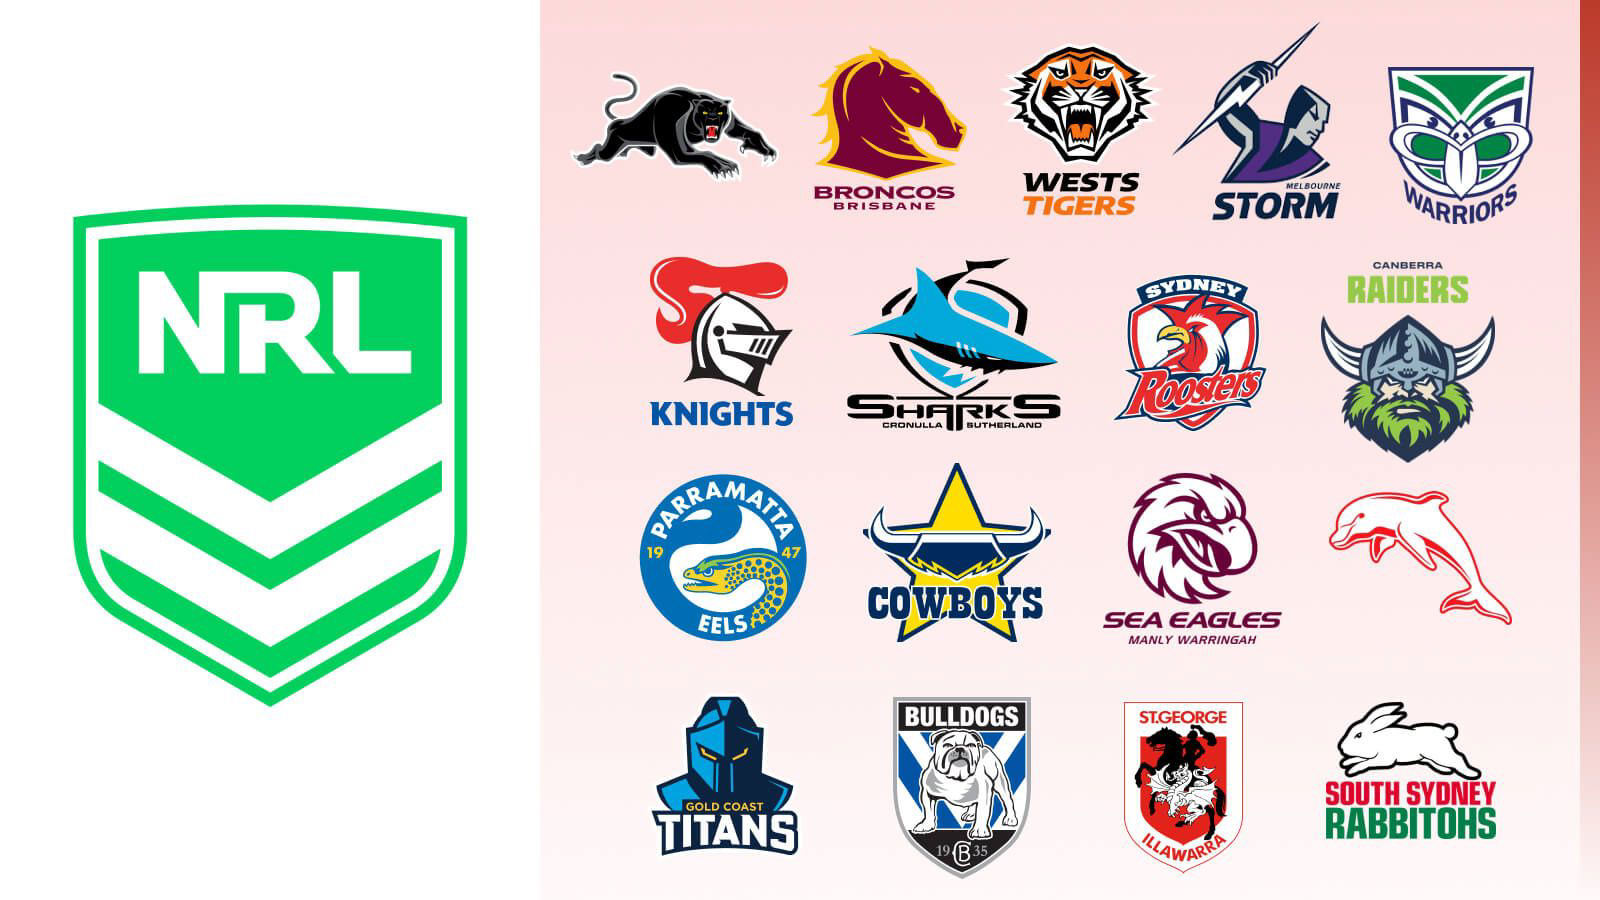 2024 NRL schedule confirmed, including Las Vegas doubleheader, State